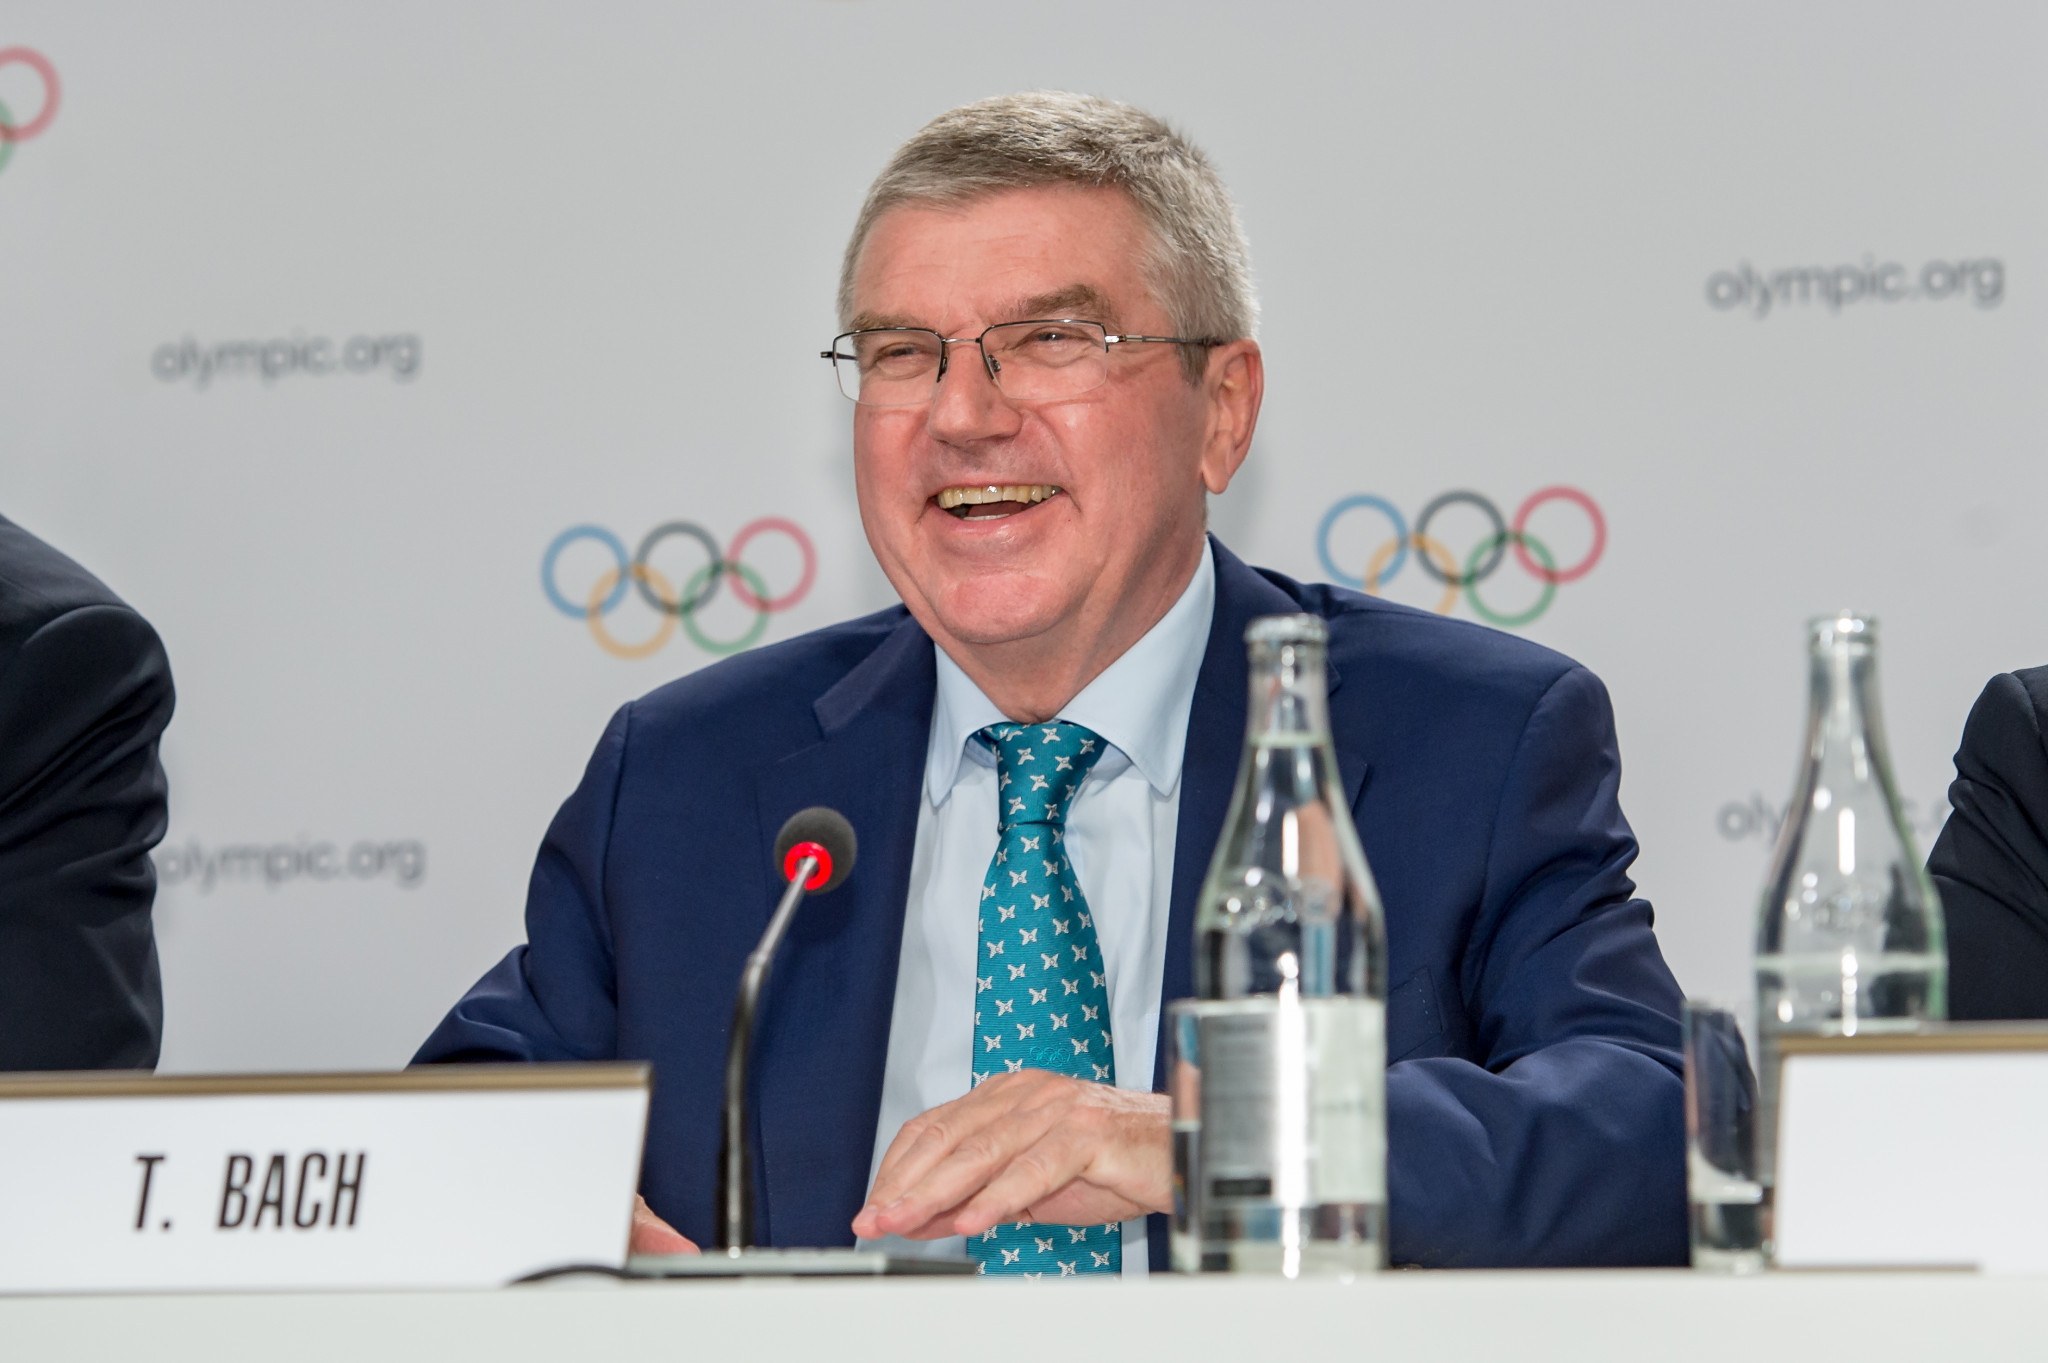 Bach criticises public authorities for ignoring differences between IOC and "purely commercial" companies in sport